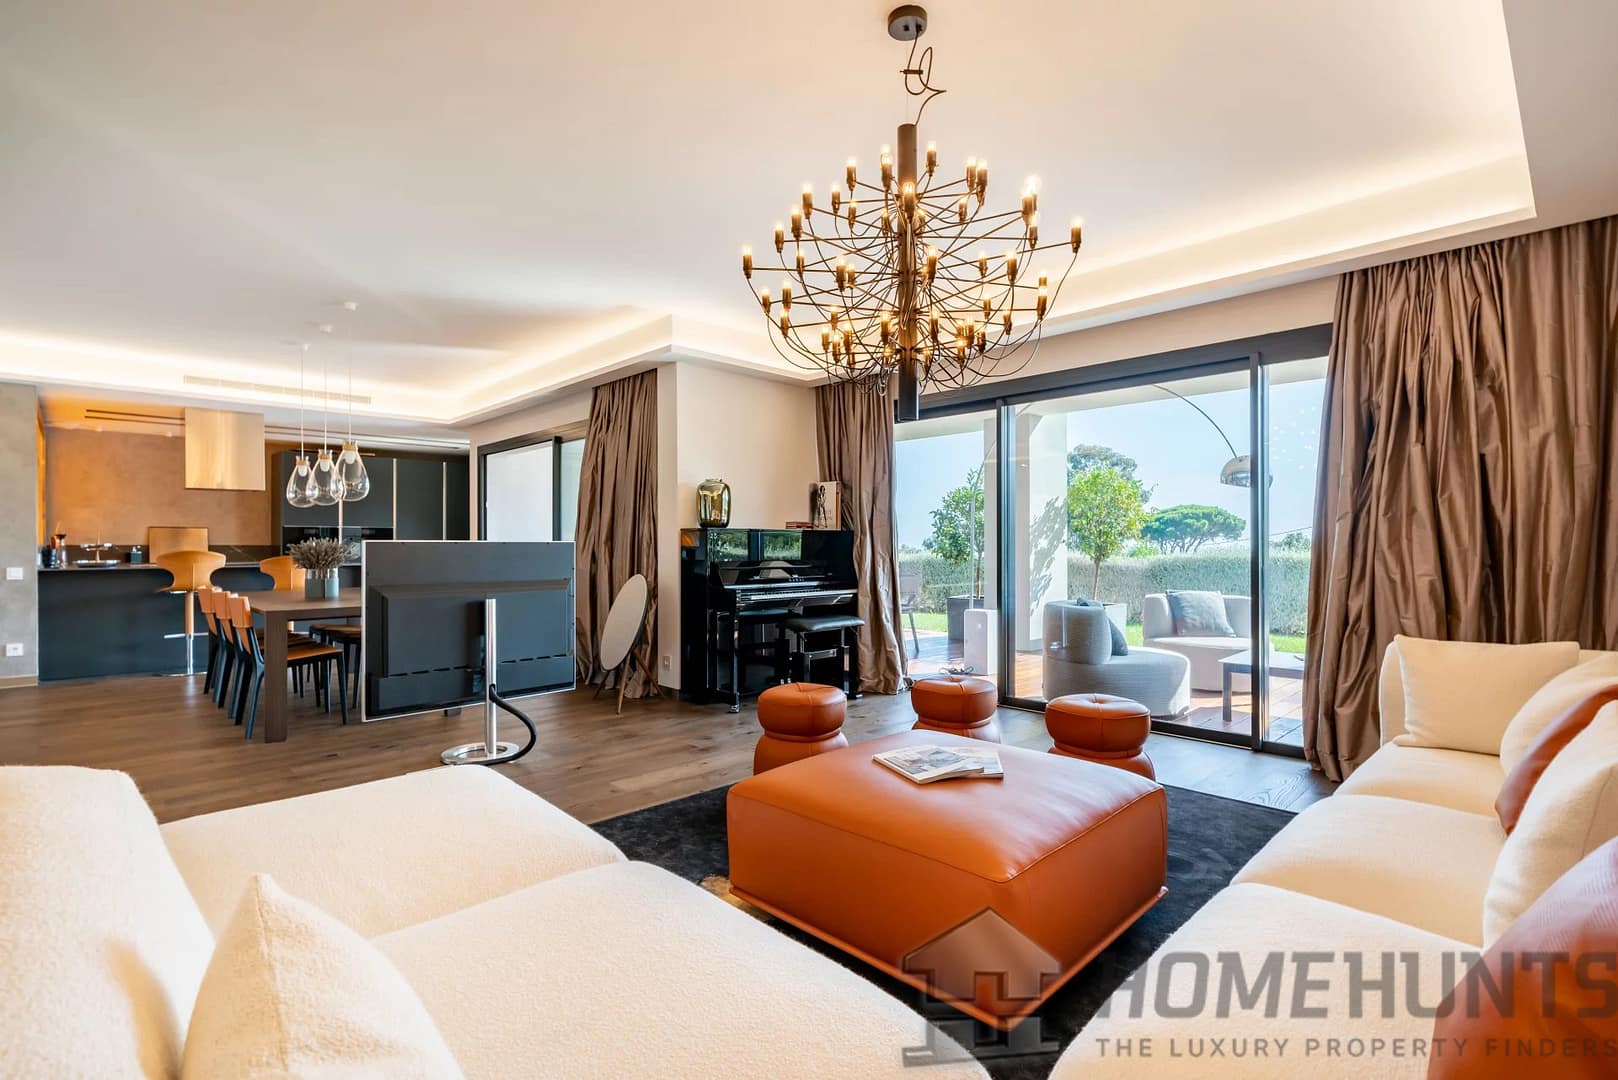 3 Bedroom Apartment in Cannes 8